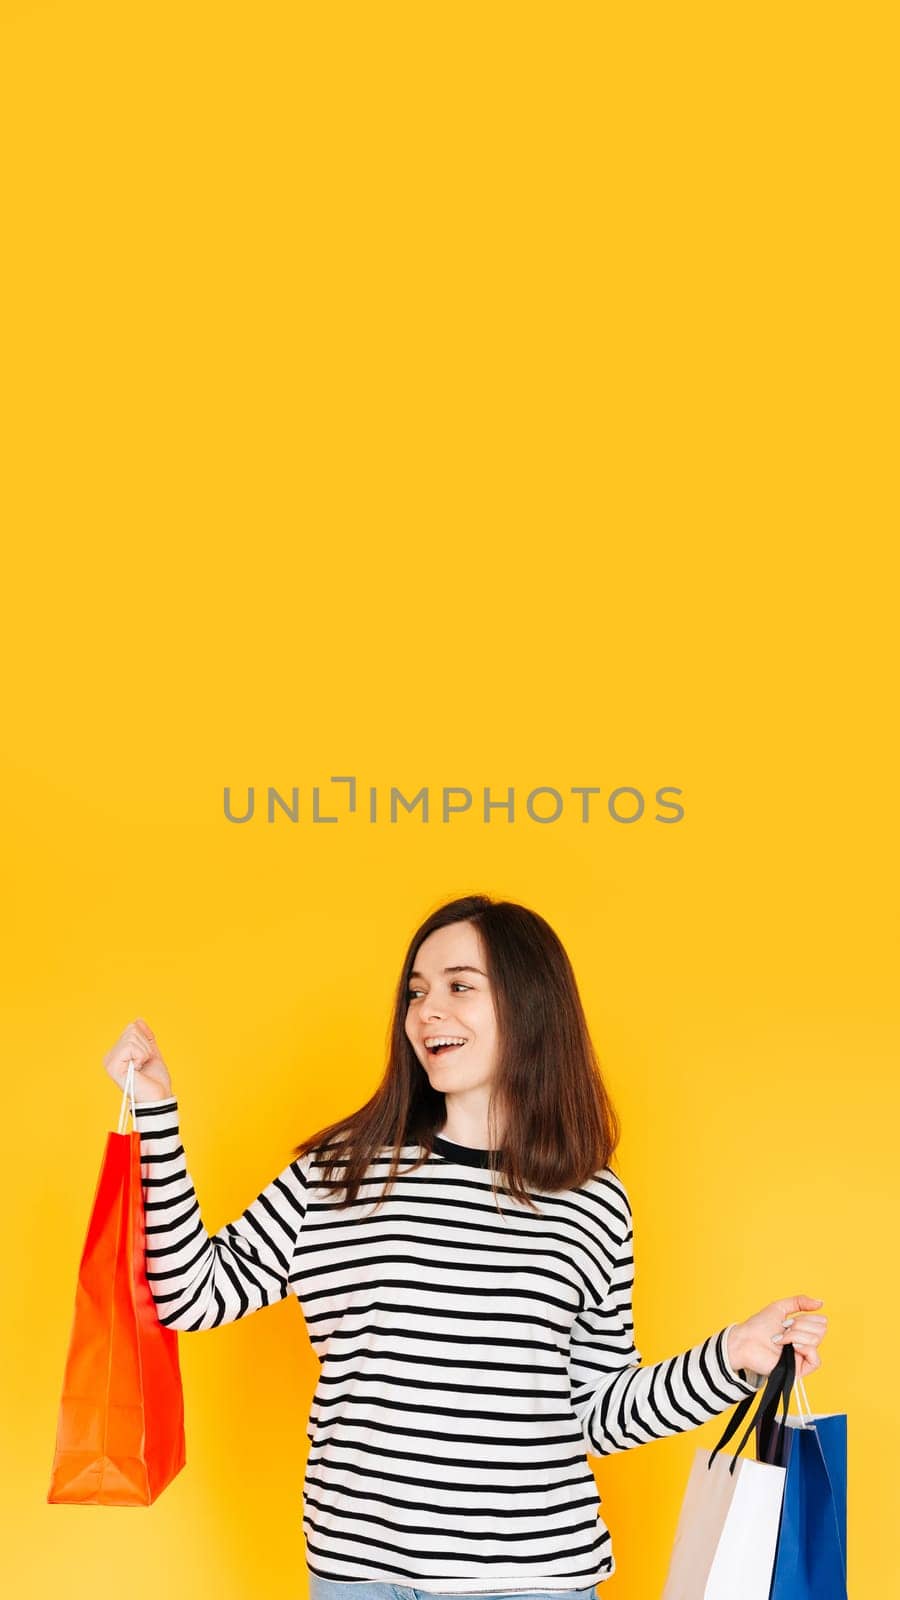 Delighted Shopper Concept: Captivating Woman Excited About Bargains and Discounts, Looking at Empty Space - Shopping Spree Mood Isolated on Vibrant Yellow Background by ViShark